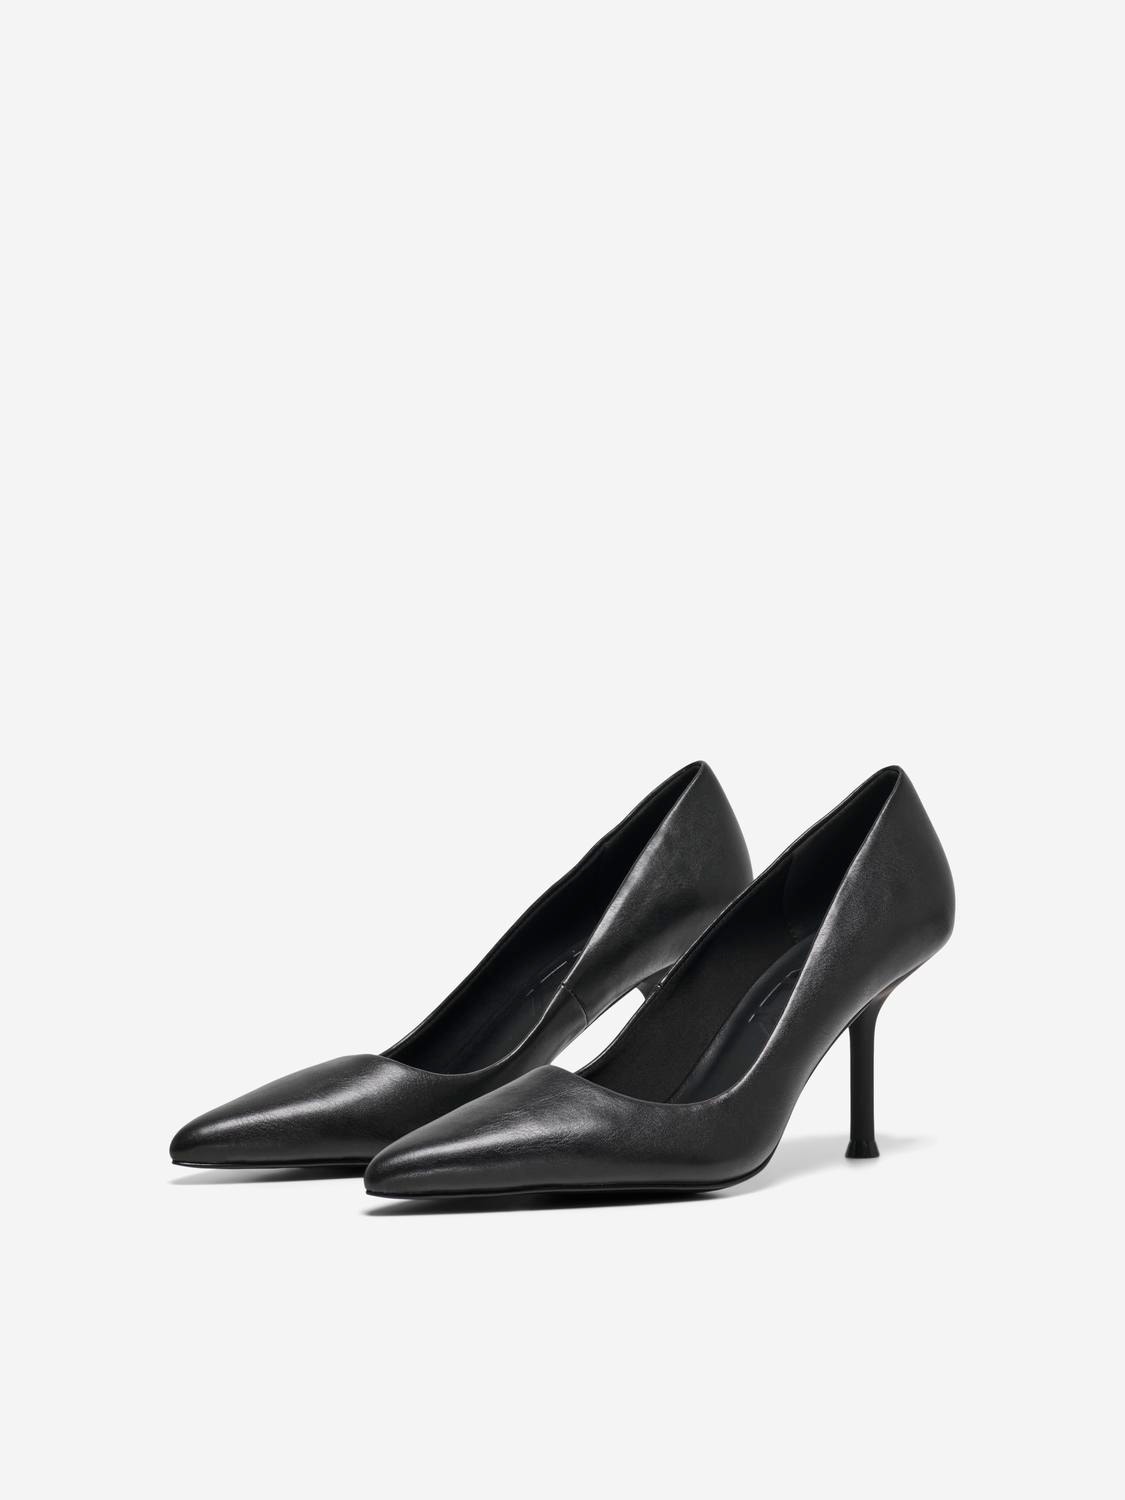 ONLY Pointed toe Pumps -Black - 15288427